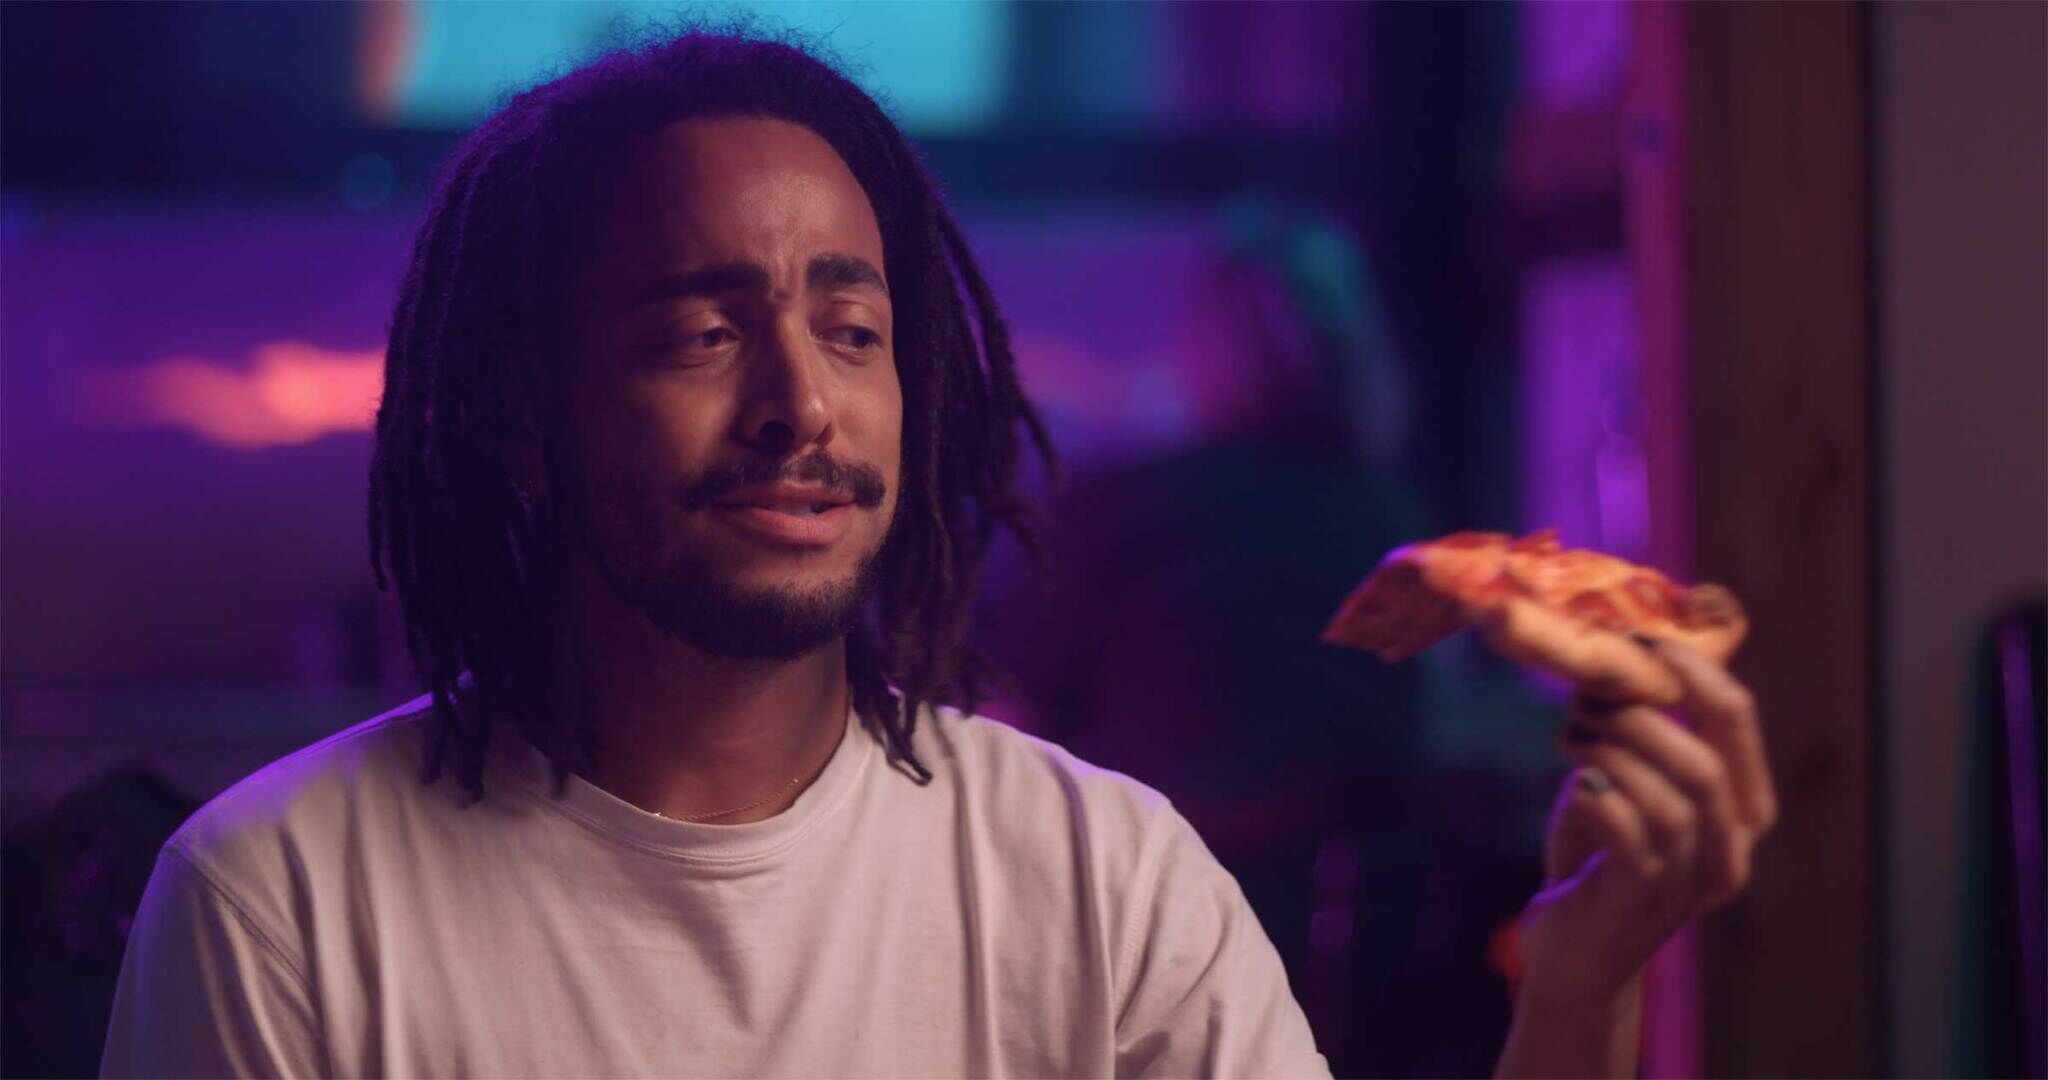 Man with dreadlocks holding a slice of pizza, looking content in a room with purple lighting.